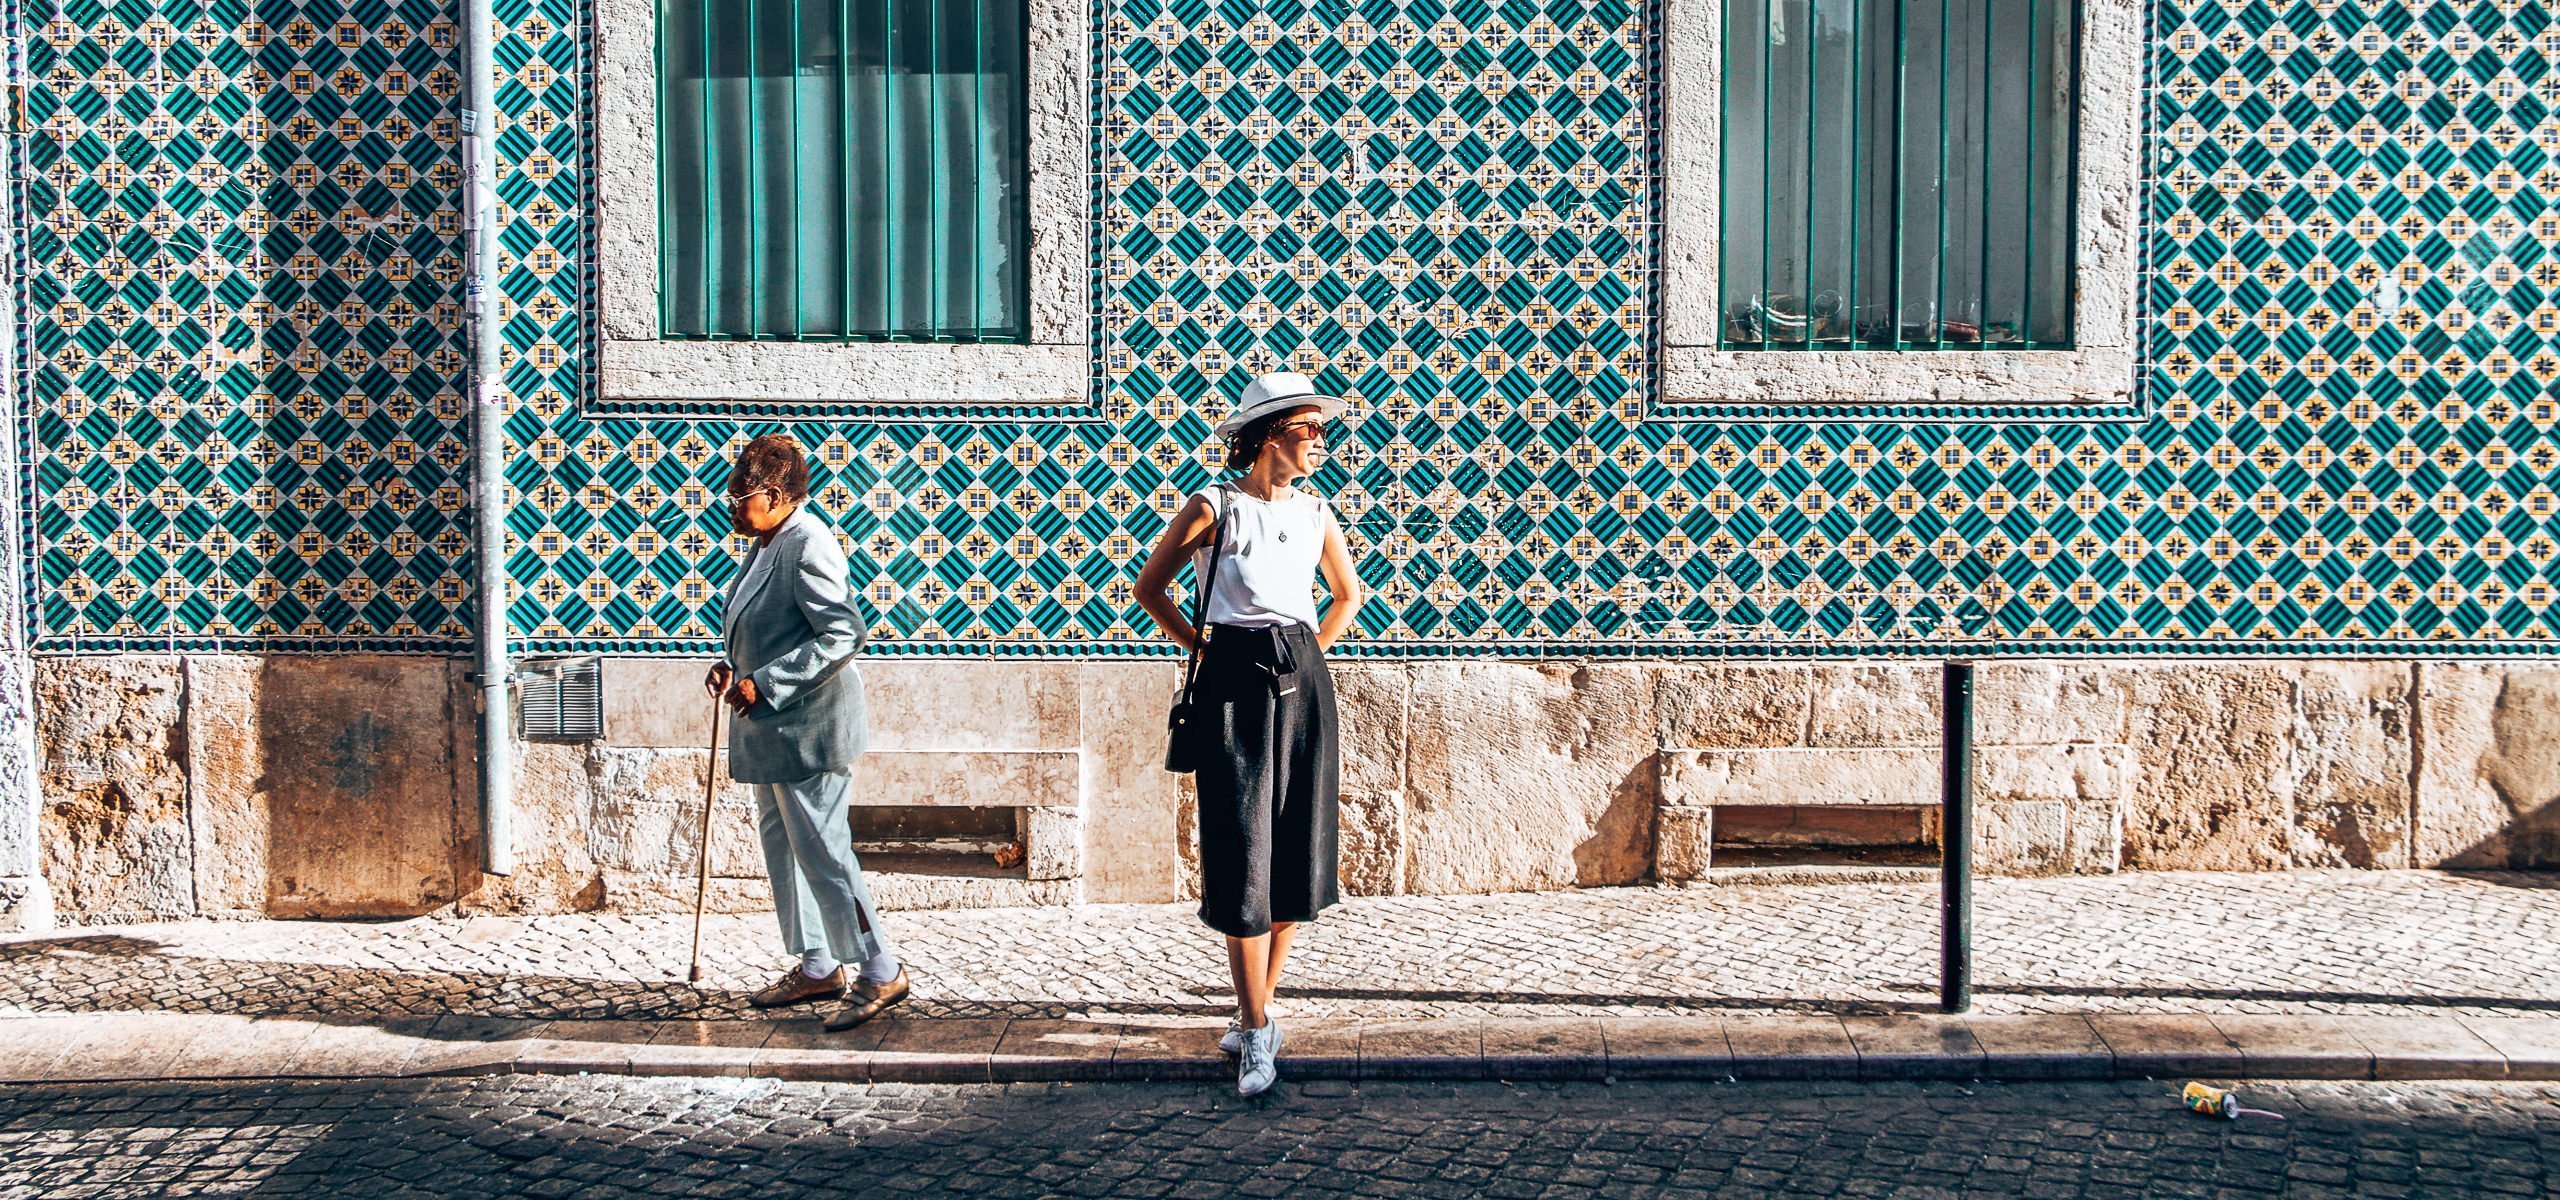 A girl stands in front of a wall bearing green and yellow azulejo tiles as an older woman with a cane shuffles past - Lisbon, Portugal